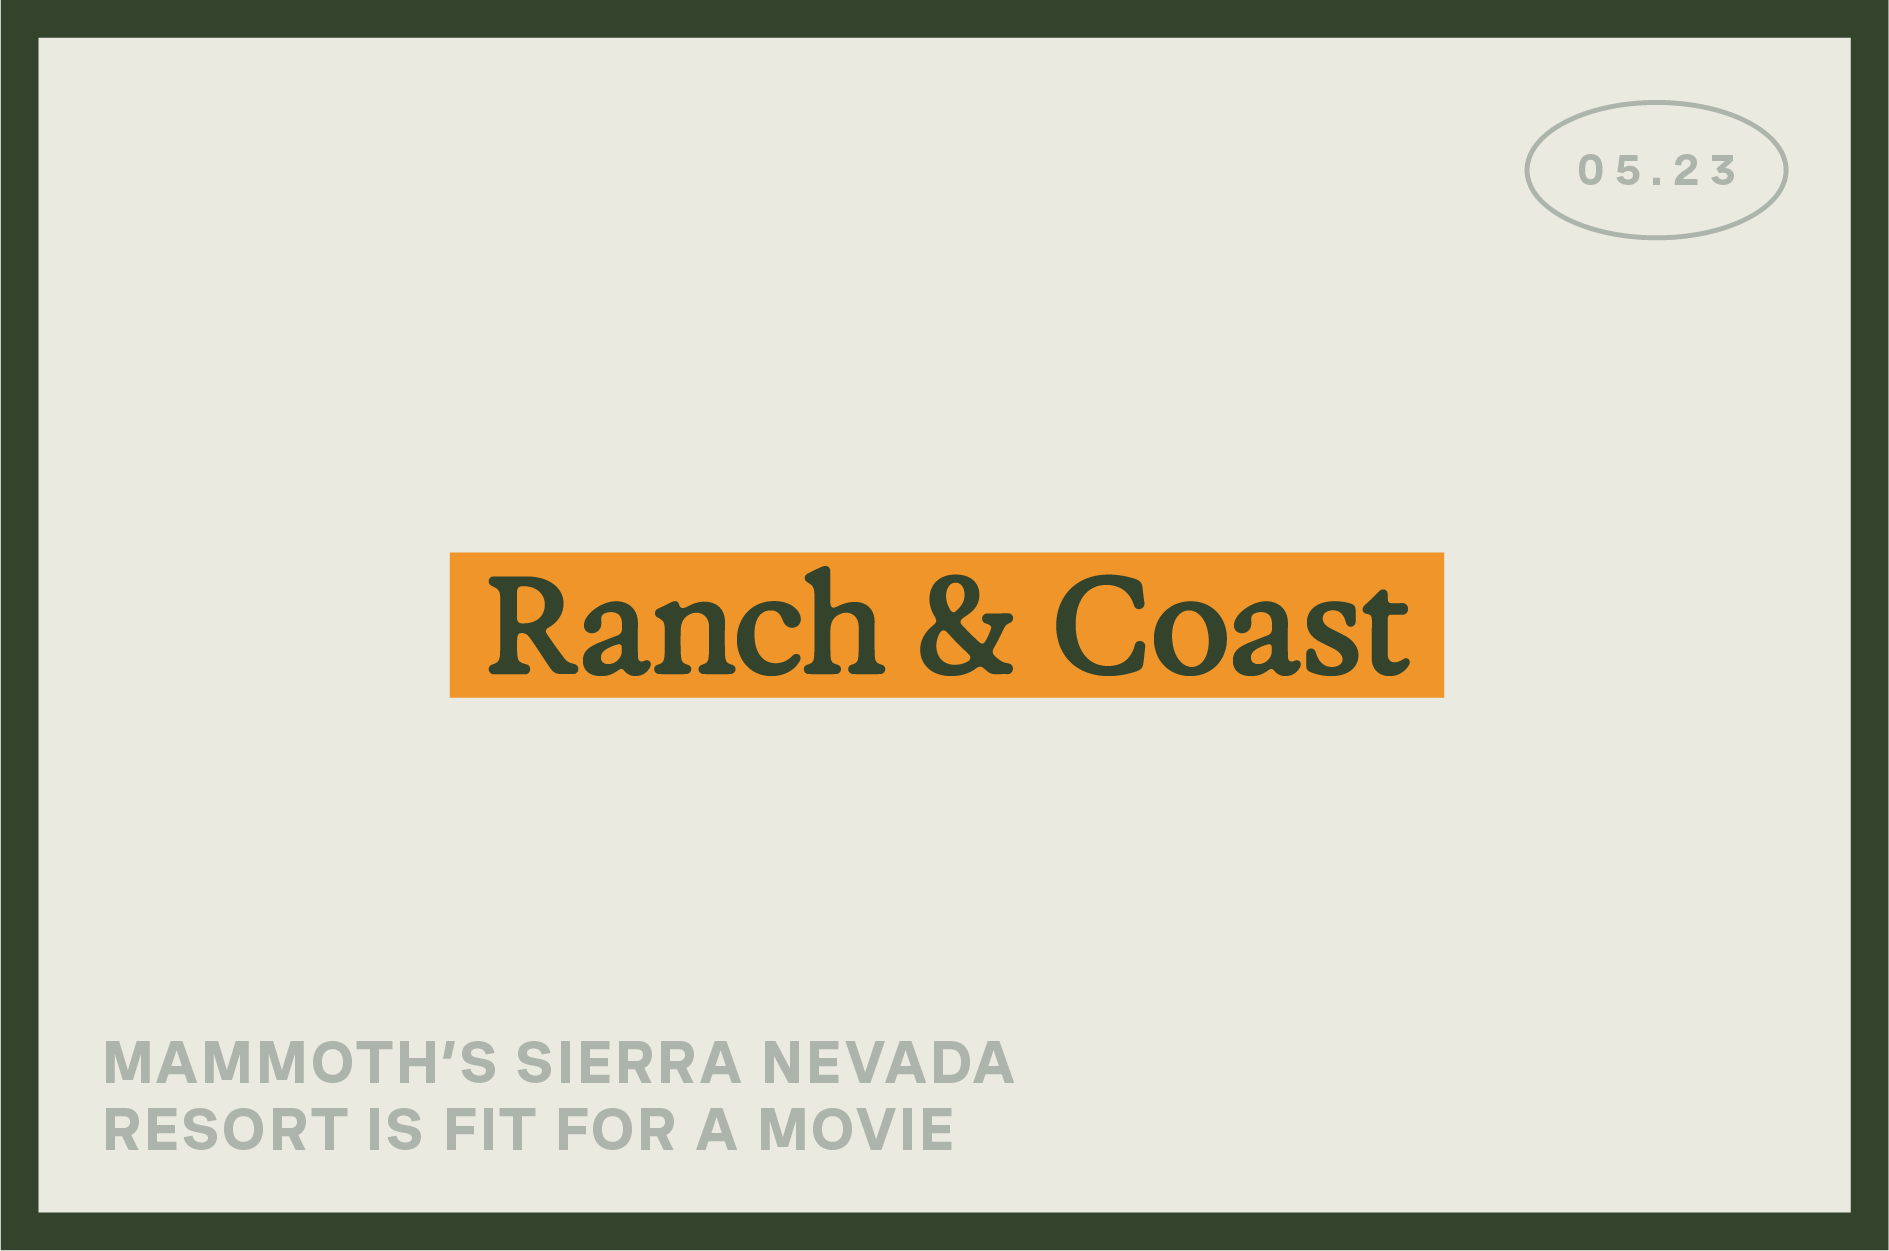 "Ranch & Coast" banner declares "Mammoth's Sierra Nevada resort is fit for a movie."